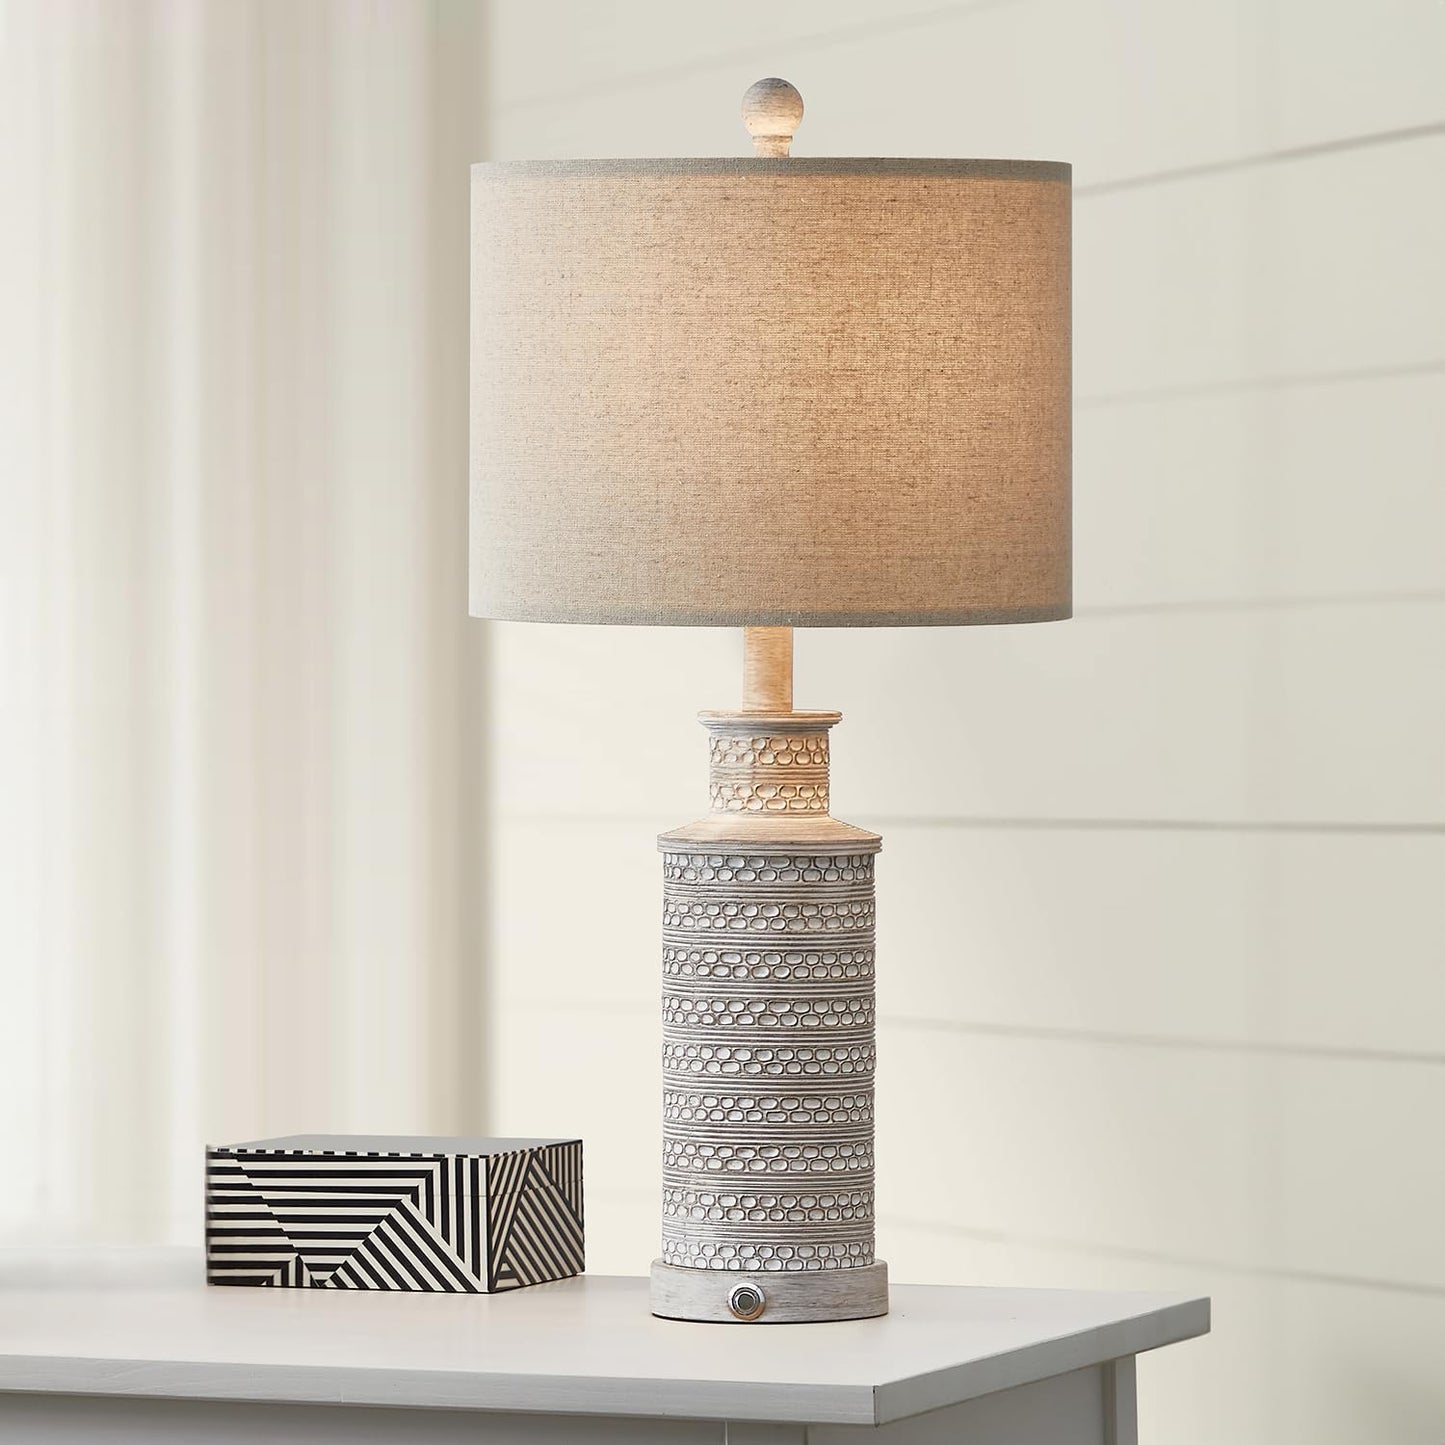 24.5" Table Lamps with 2 USB Charging Ports, 3 Way Dimmable Touch Control Farmhouse Lamp(1 Bulb Included)